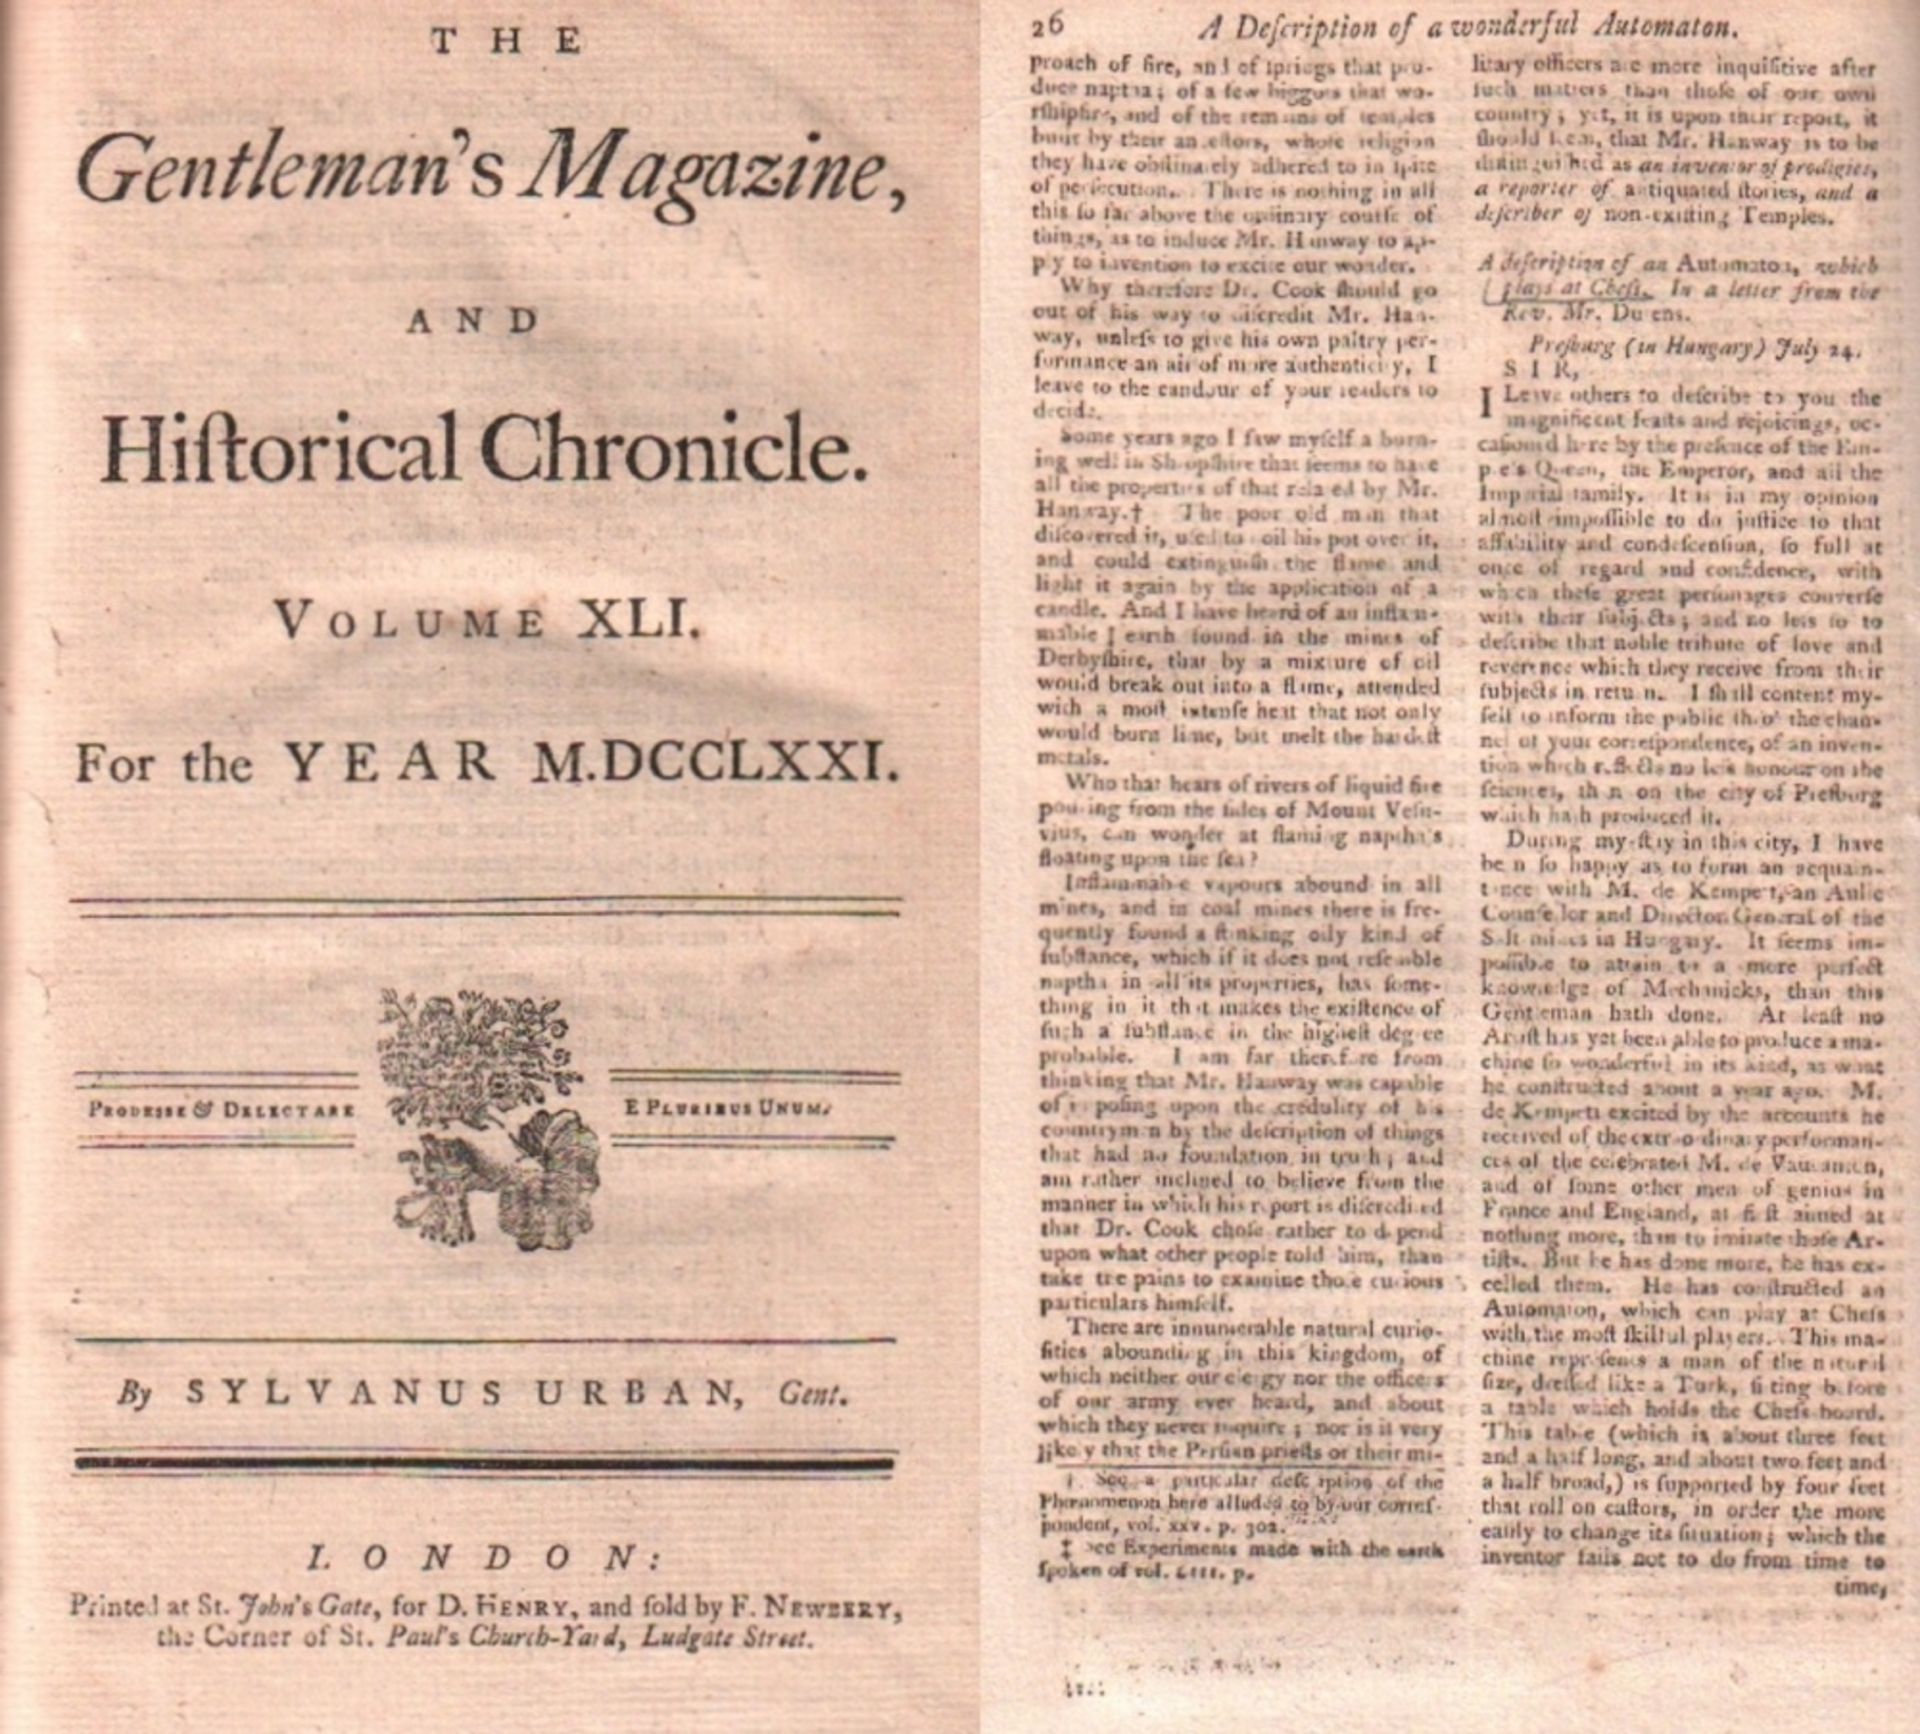 The Gentleman's Magazine, and Historical Chronicle. By Sylvanus Urban. Volume XLI., for the year